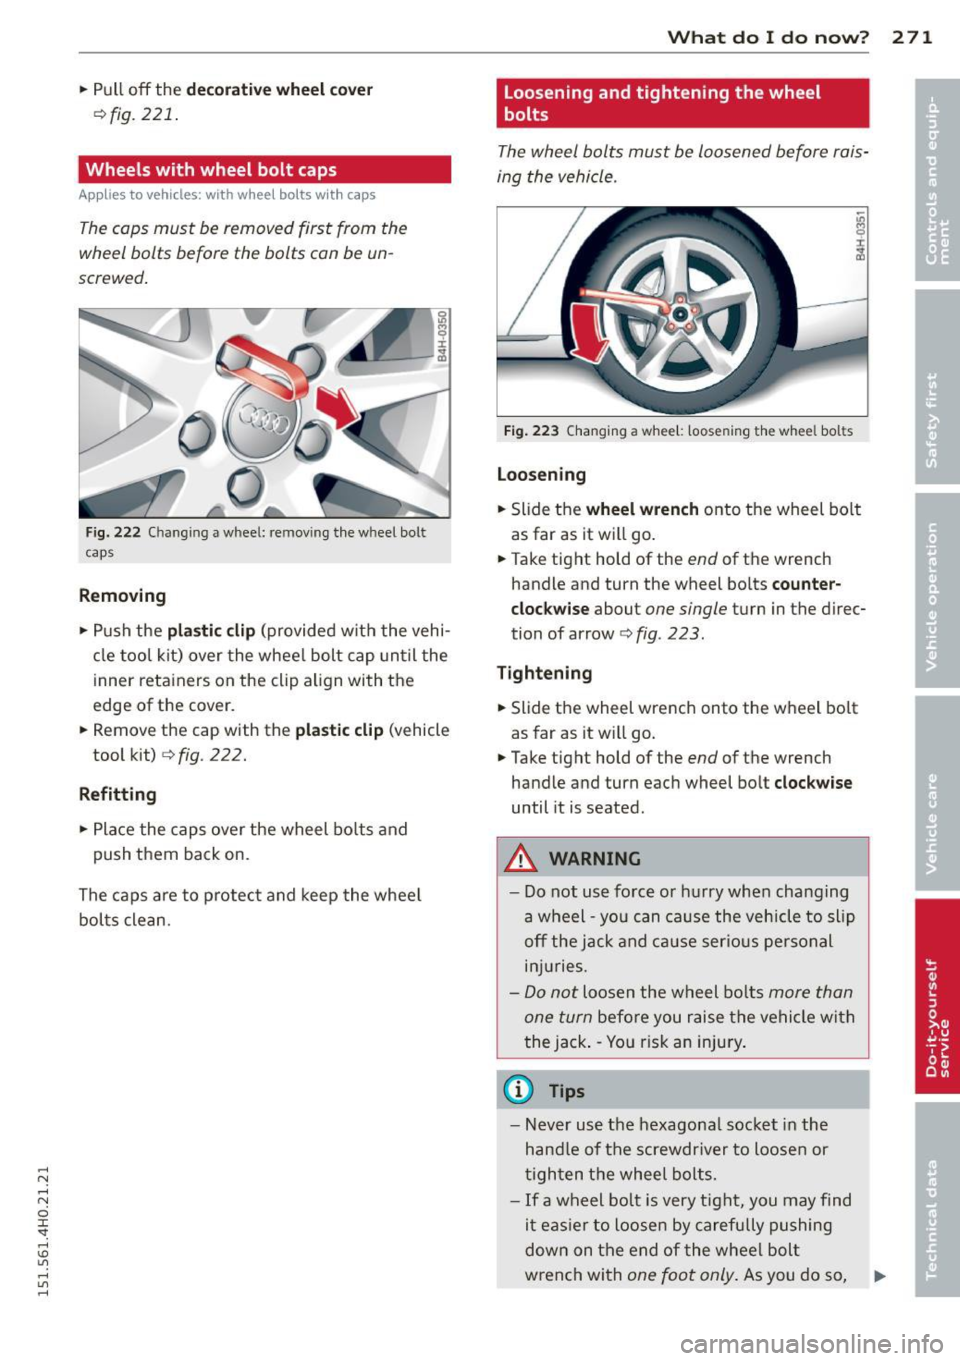 AUDI A8 2015  Owners Manual .... N .... N 
0 J: 
"". .... I.O 
" .... 
" .... 
.. Pull off the decorati ve wheel  c over 
r=>fig. 221 . 
Wheels  with  wheel  bolt  caps 
Applies  to vehicles:  with wheel  bolts  with  caps 
Th